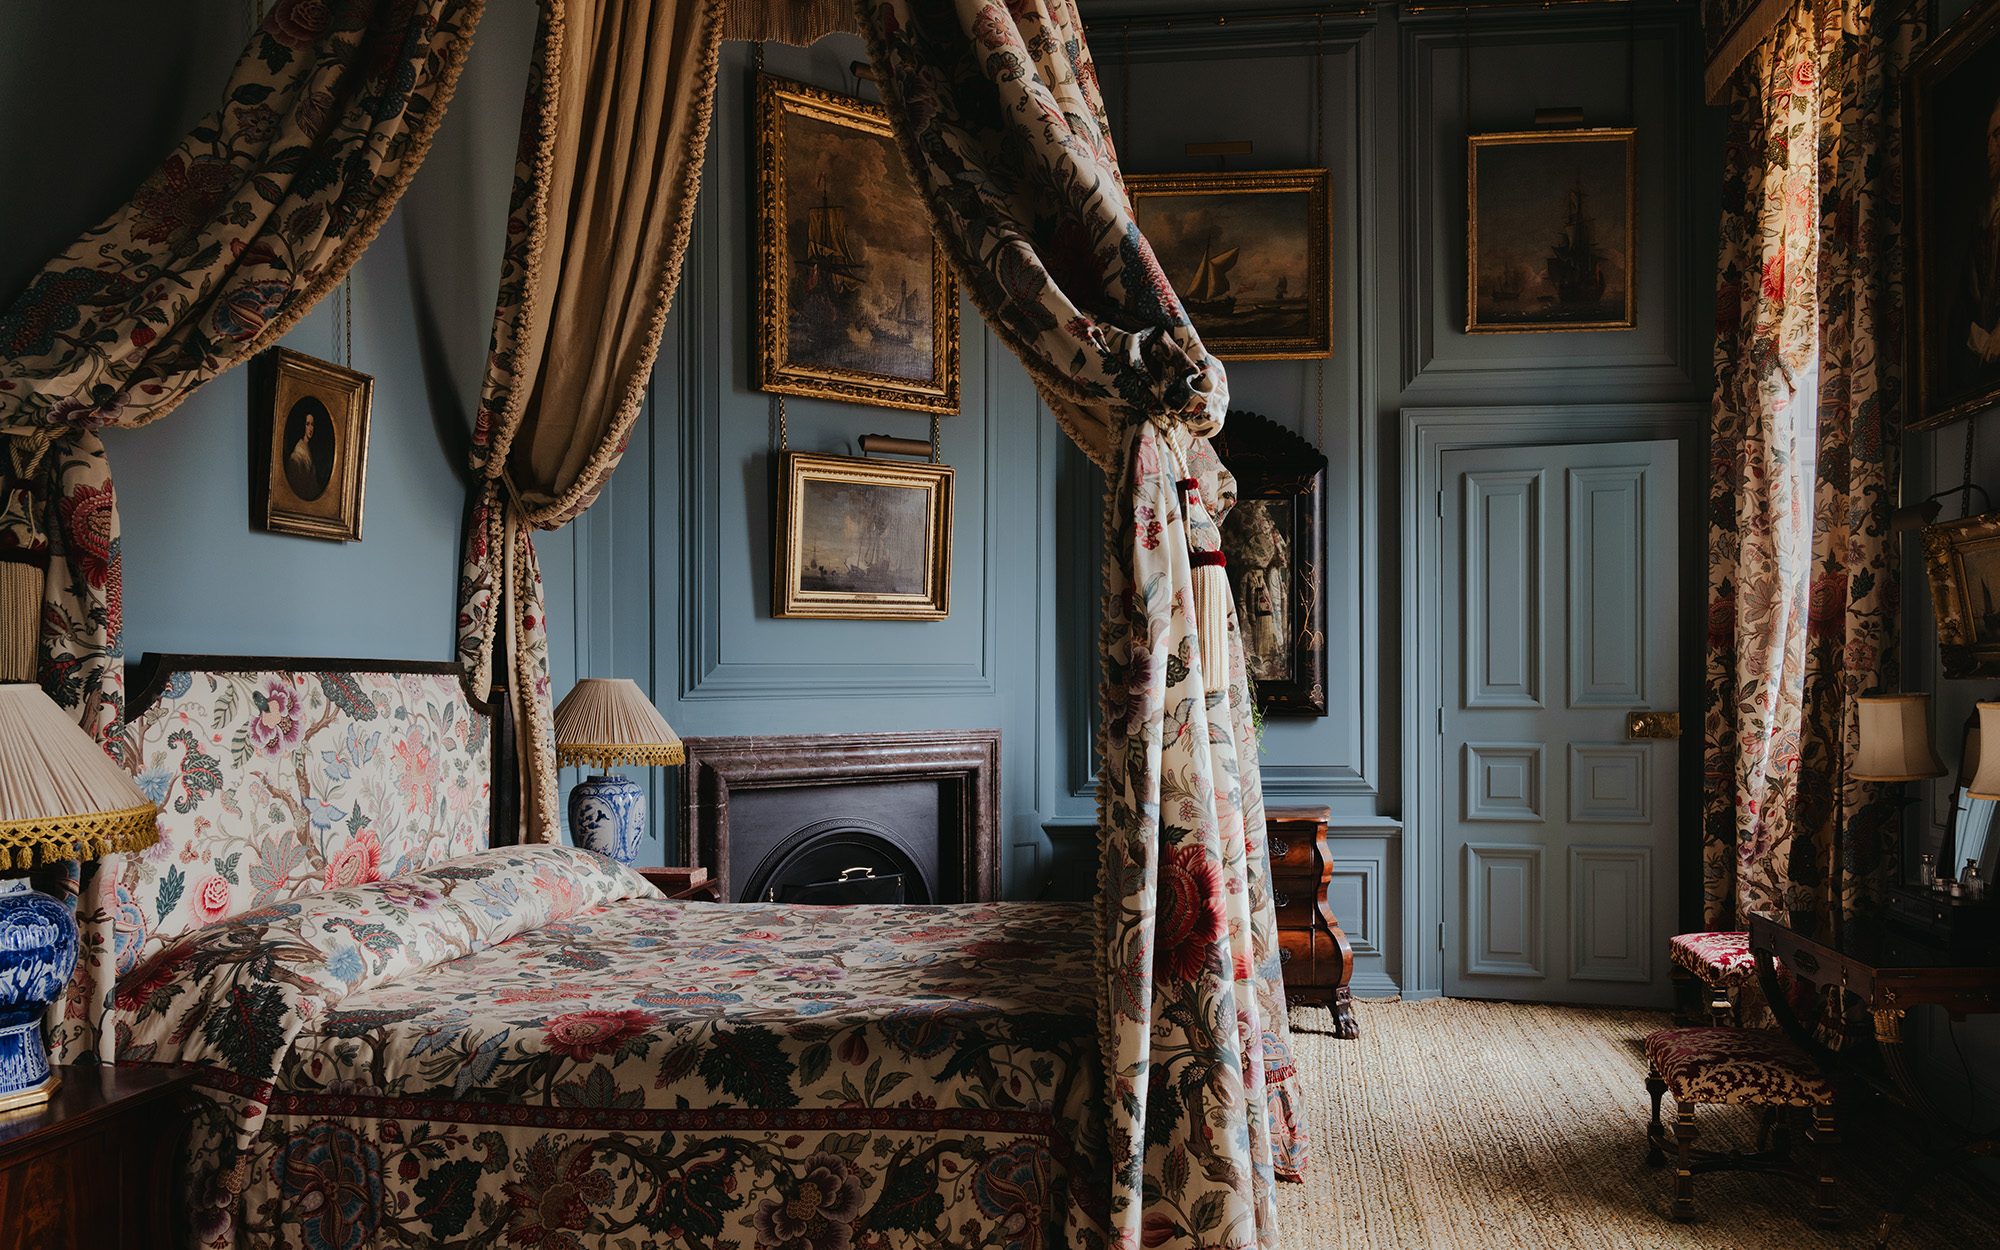 The Admiral’s bedroom features the Howard Indienne pattern, available as part of the Watts 1874 furnishings collection